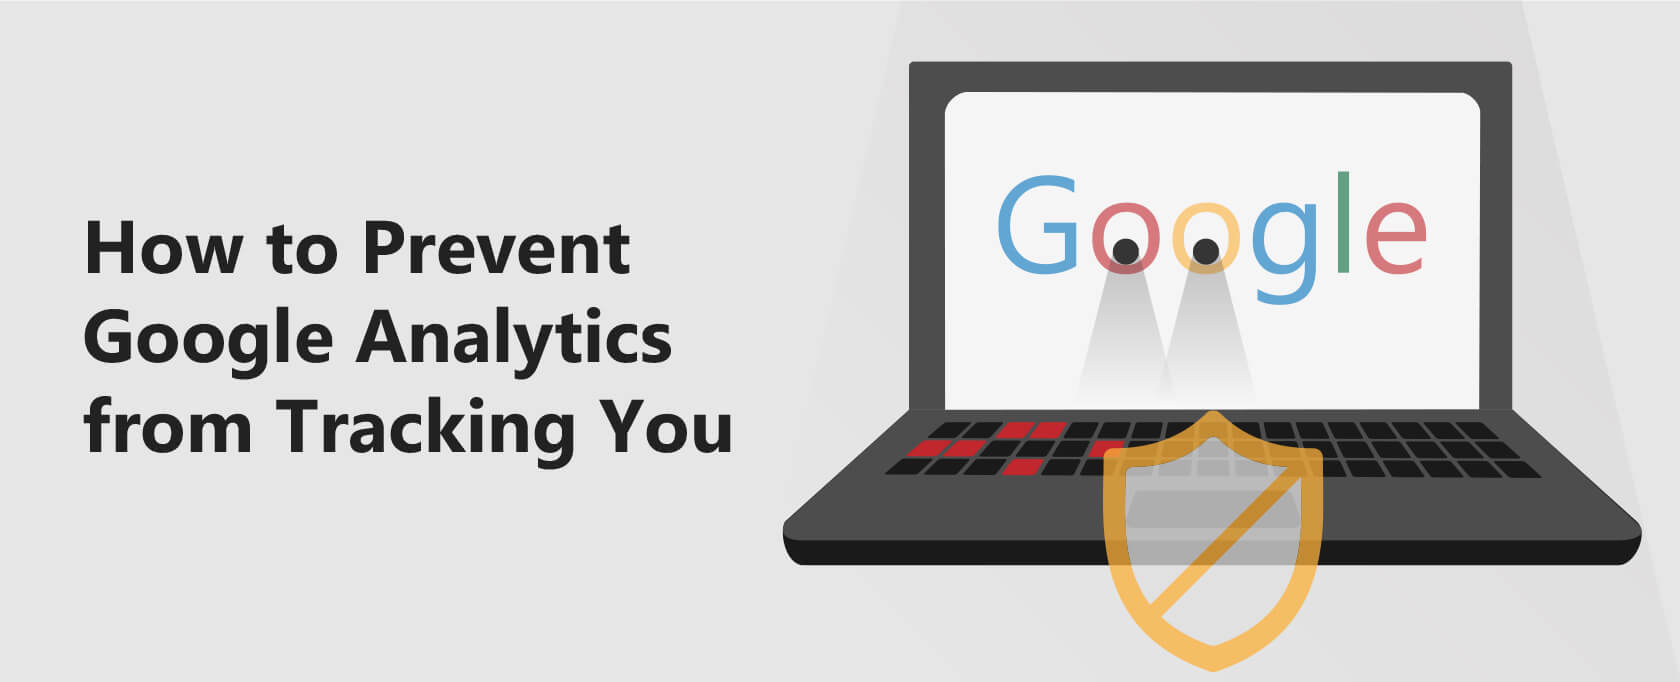 How to Prevent Google Analytics from Tracking You